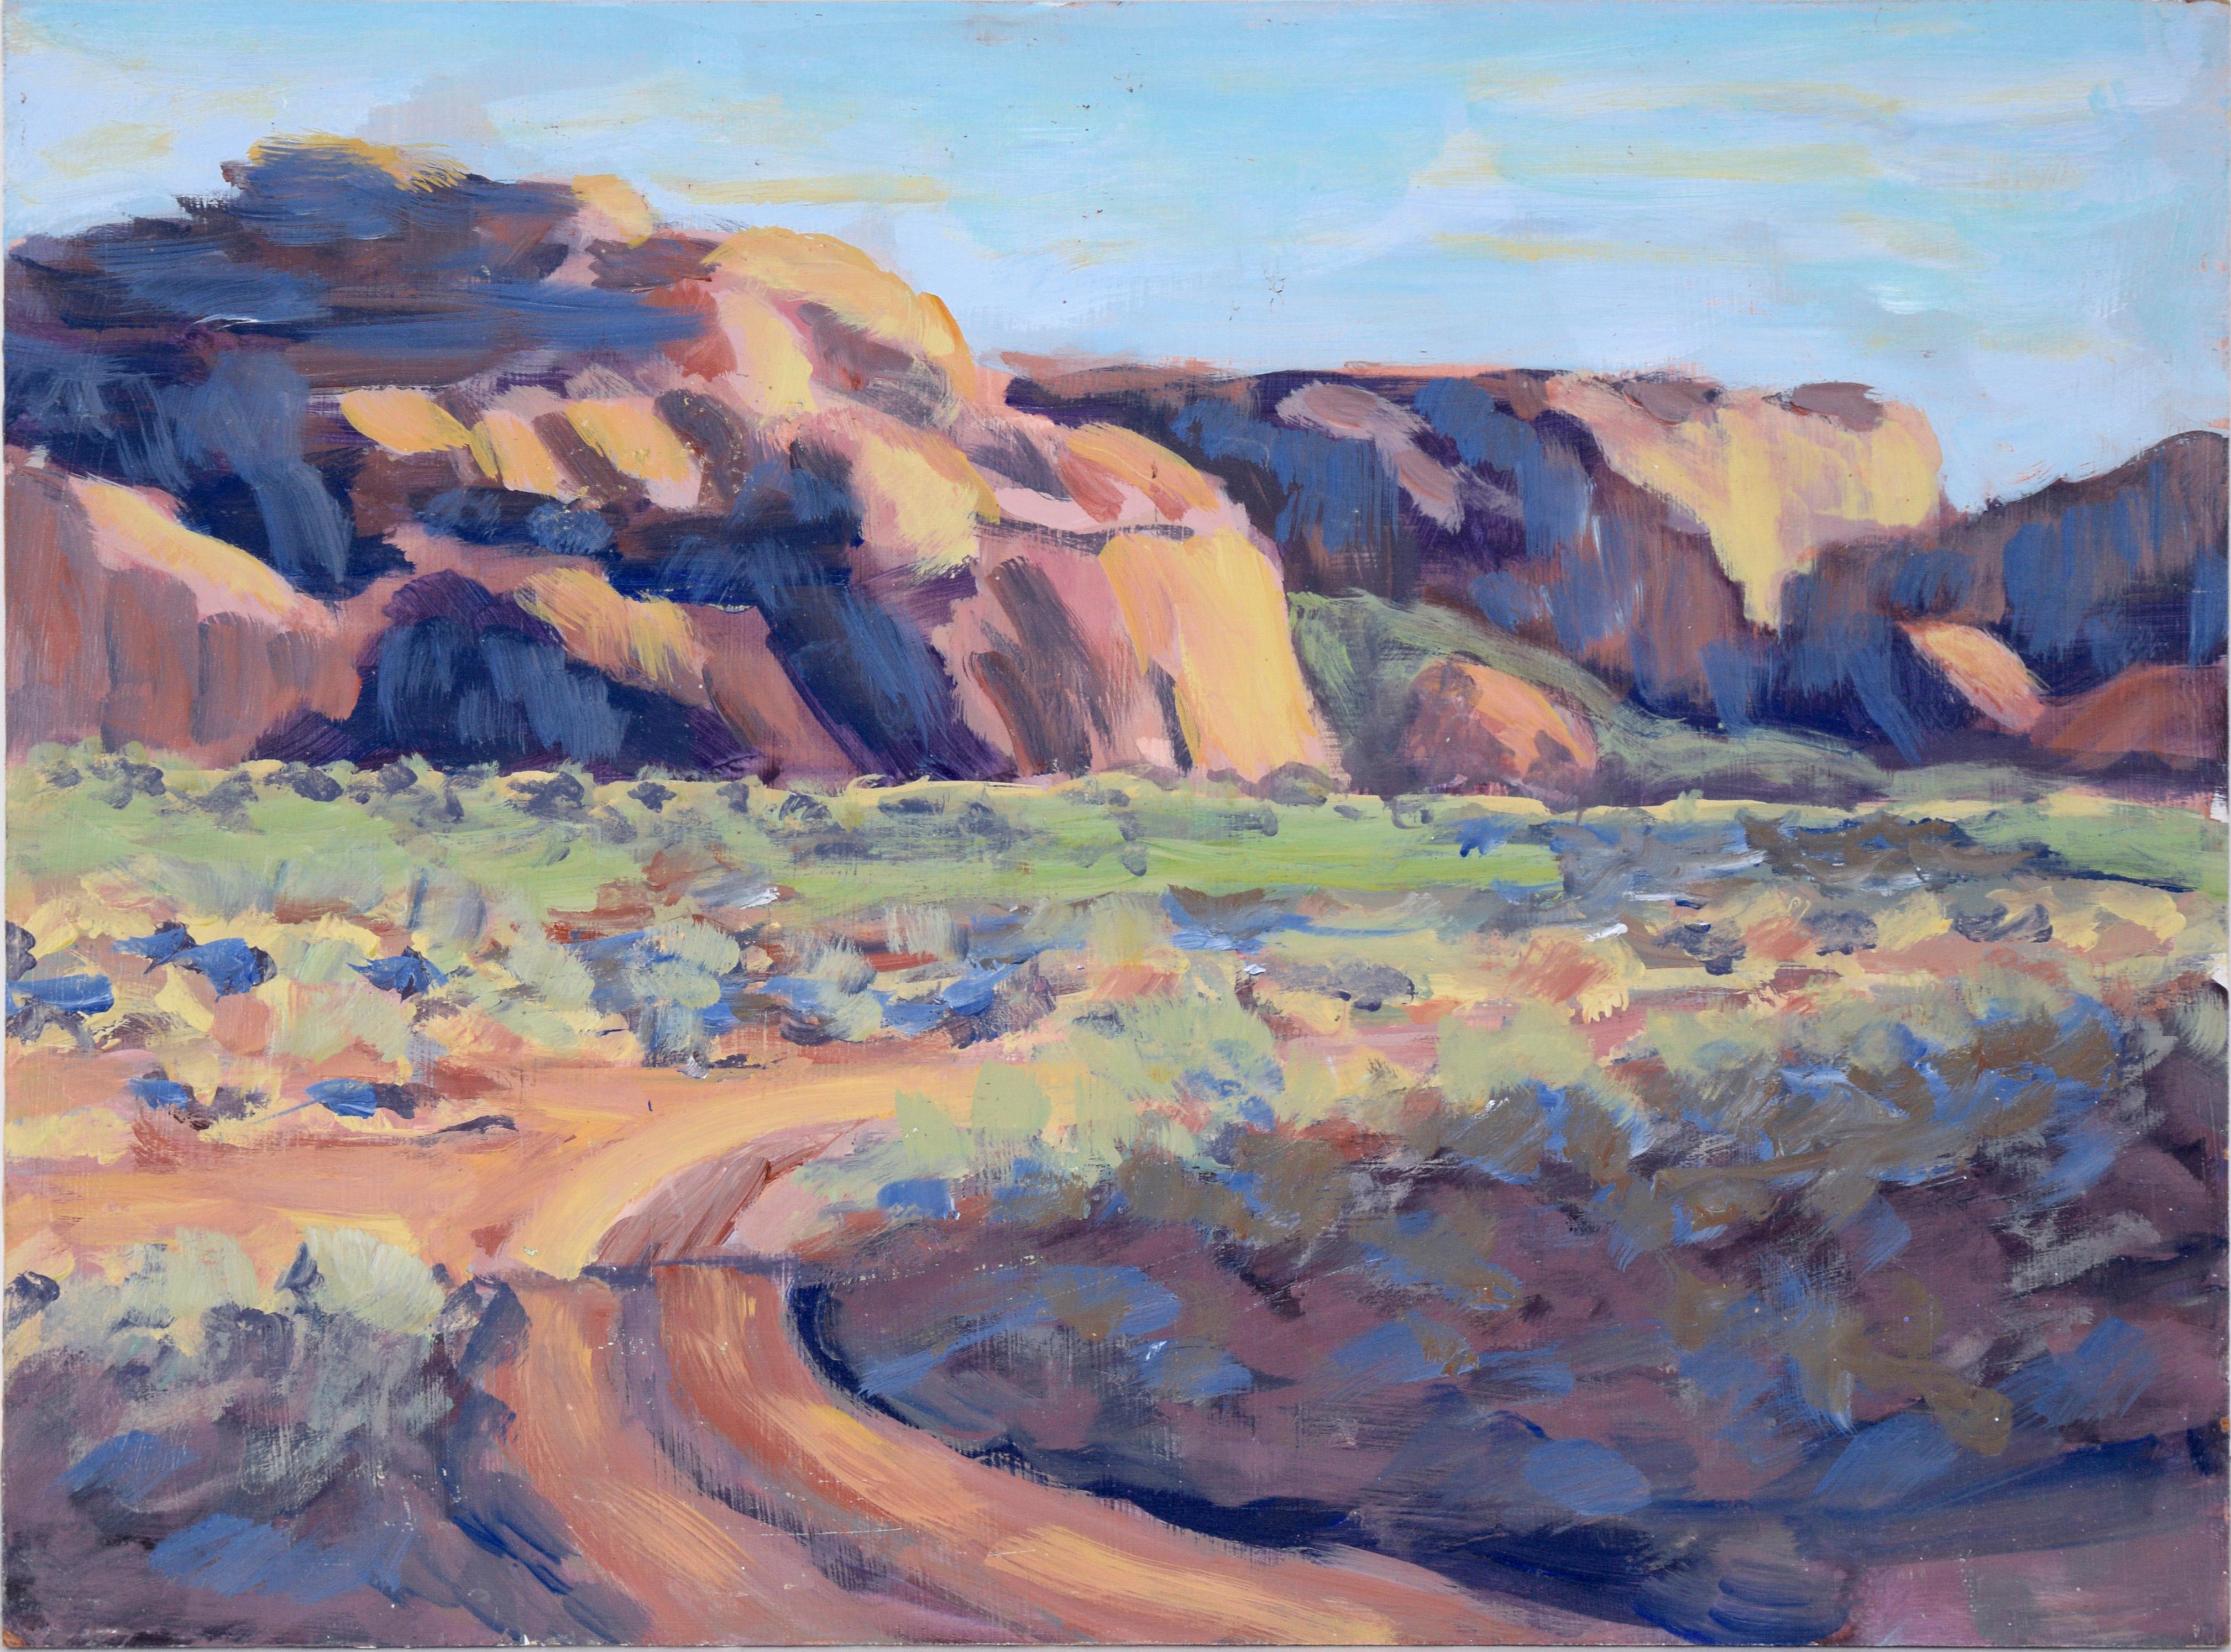 Nick White Landscape Painting - "Touring Monument Valley" - Desert Plein Aire Landscape in Acrylic on Masonite